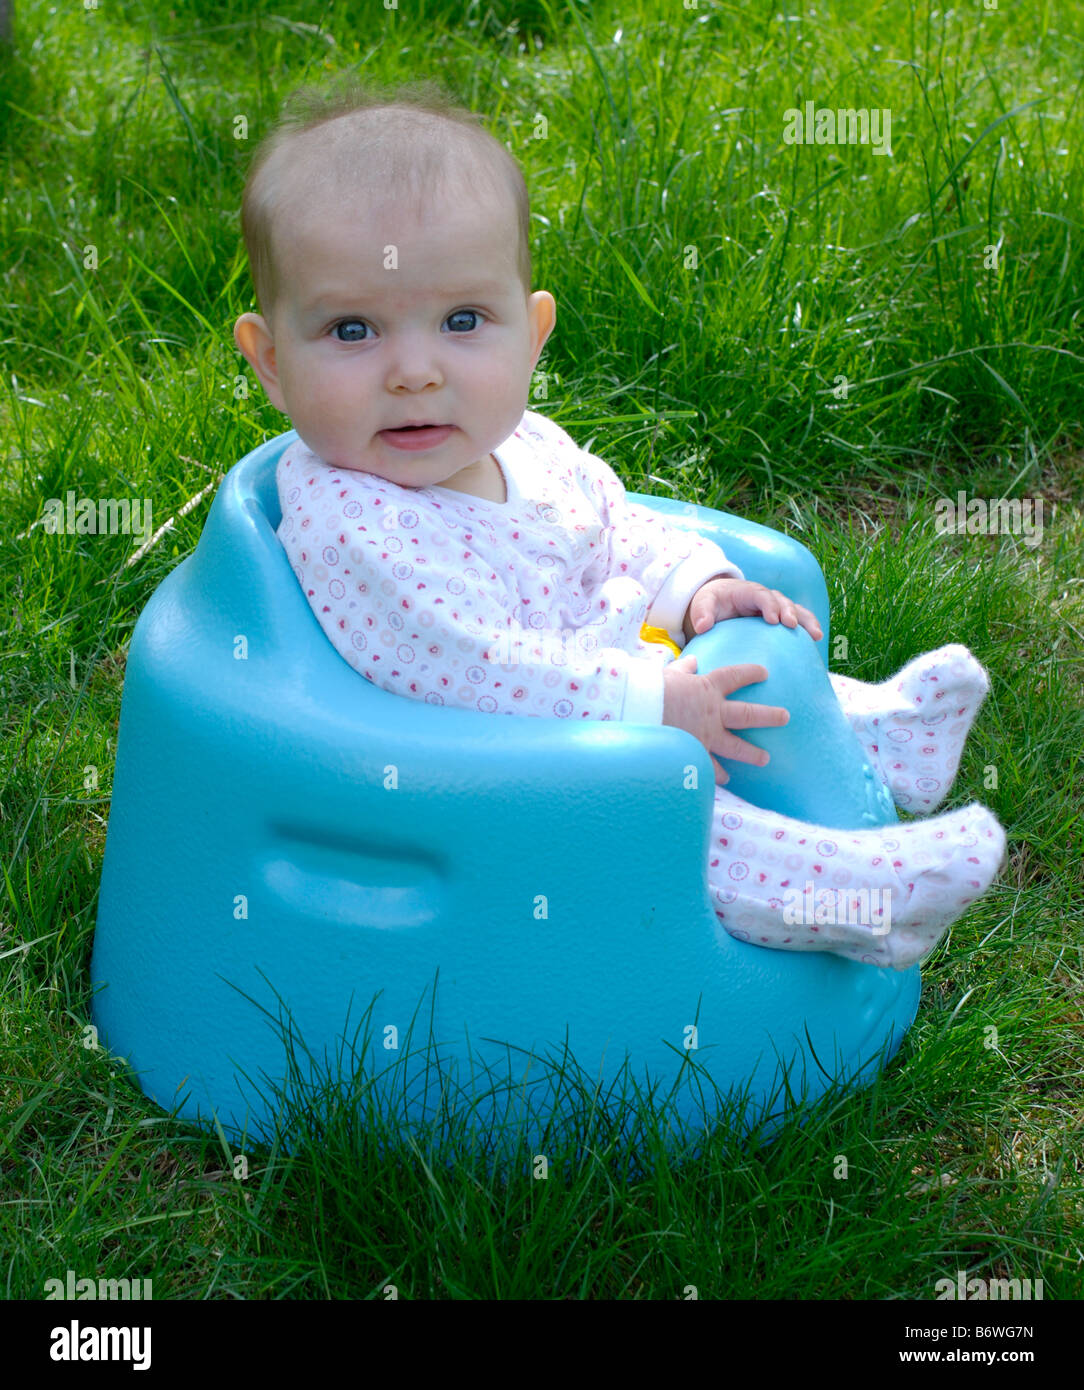 Bumbo Baby Seat Banque d'image et photos - Alamy